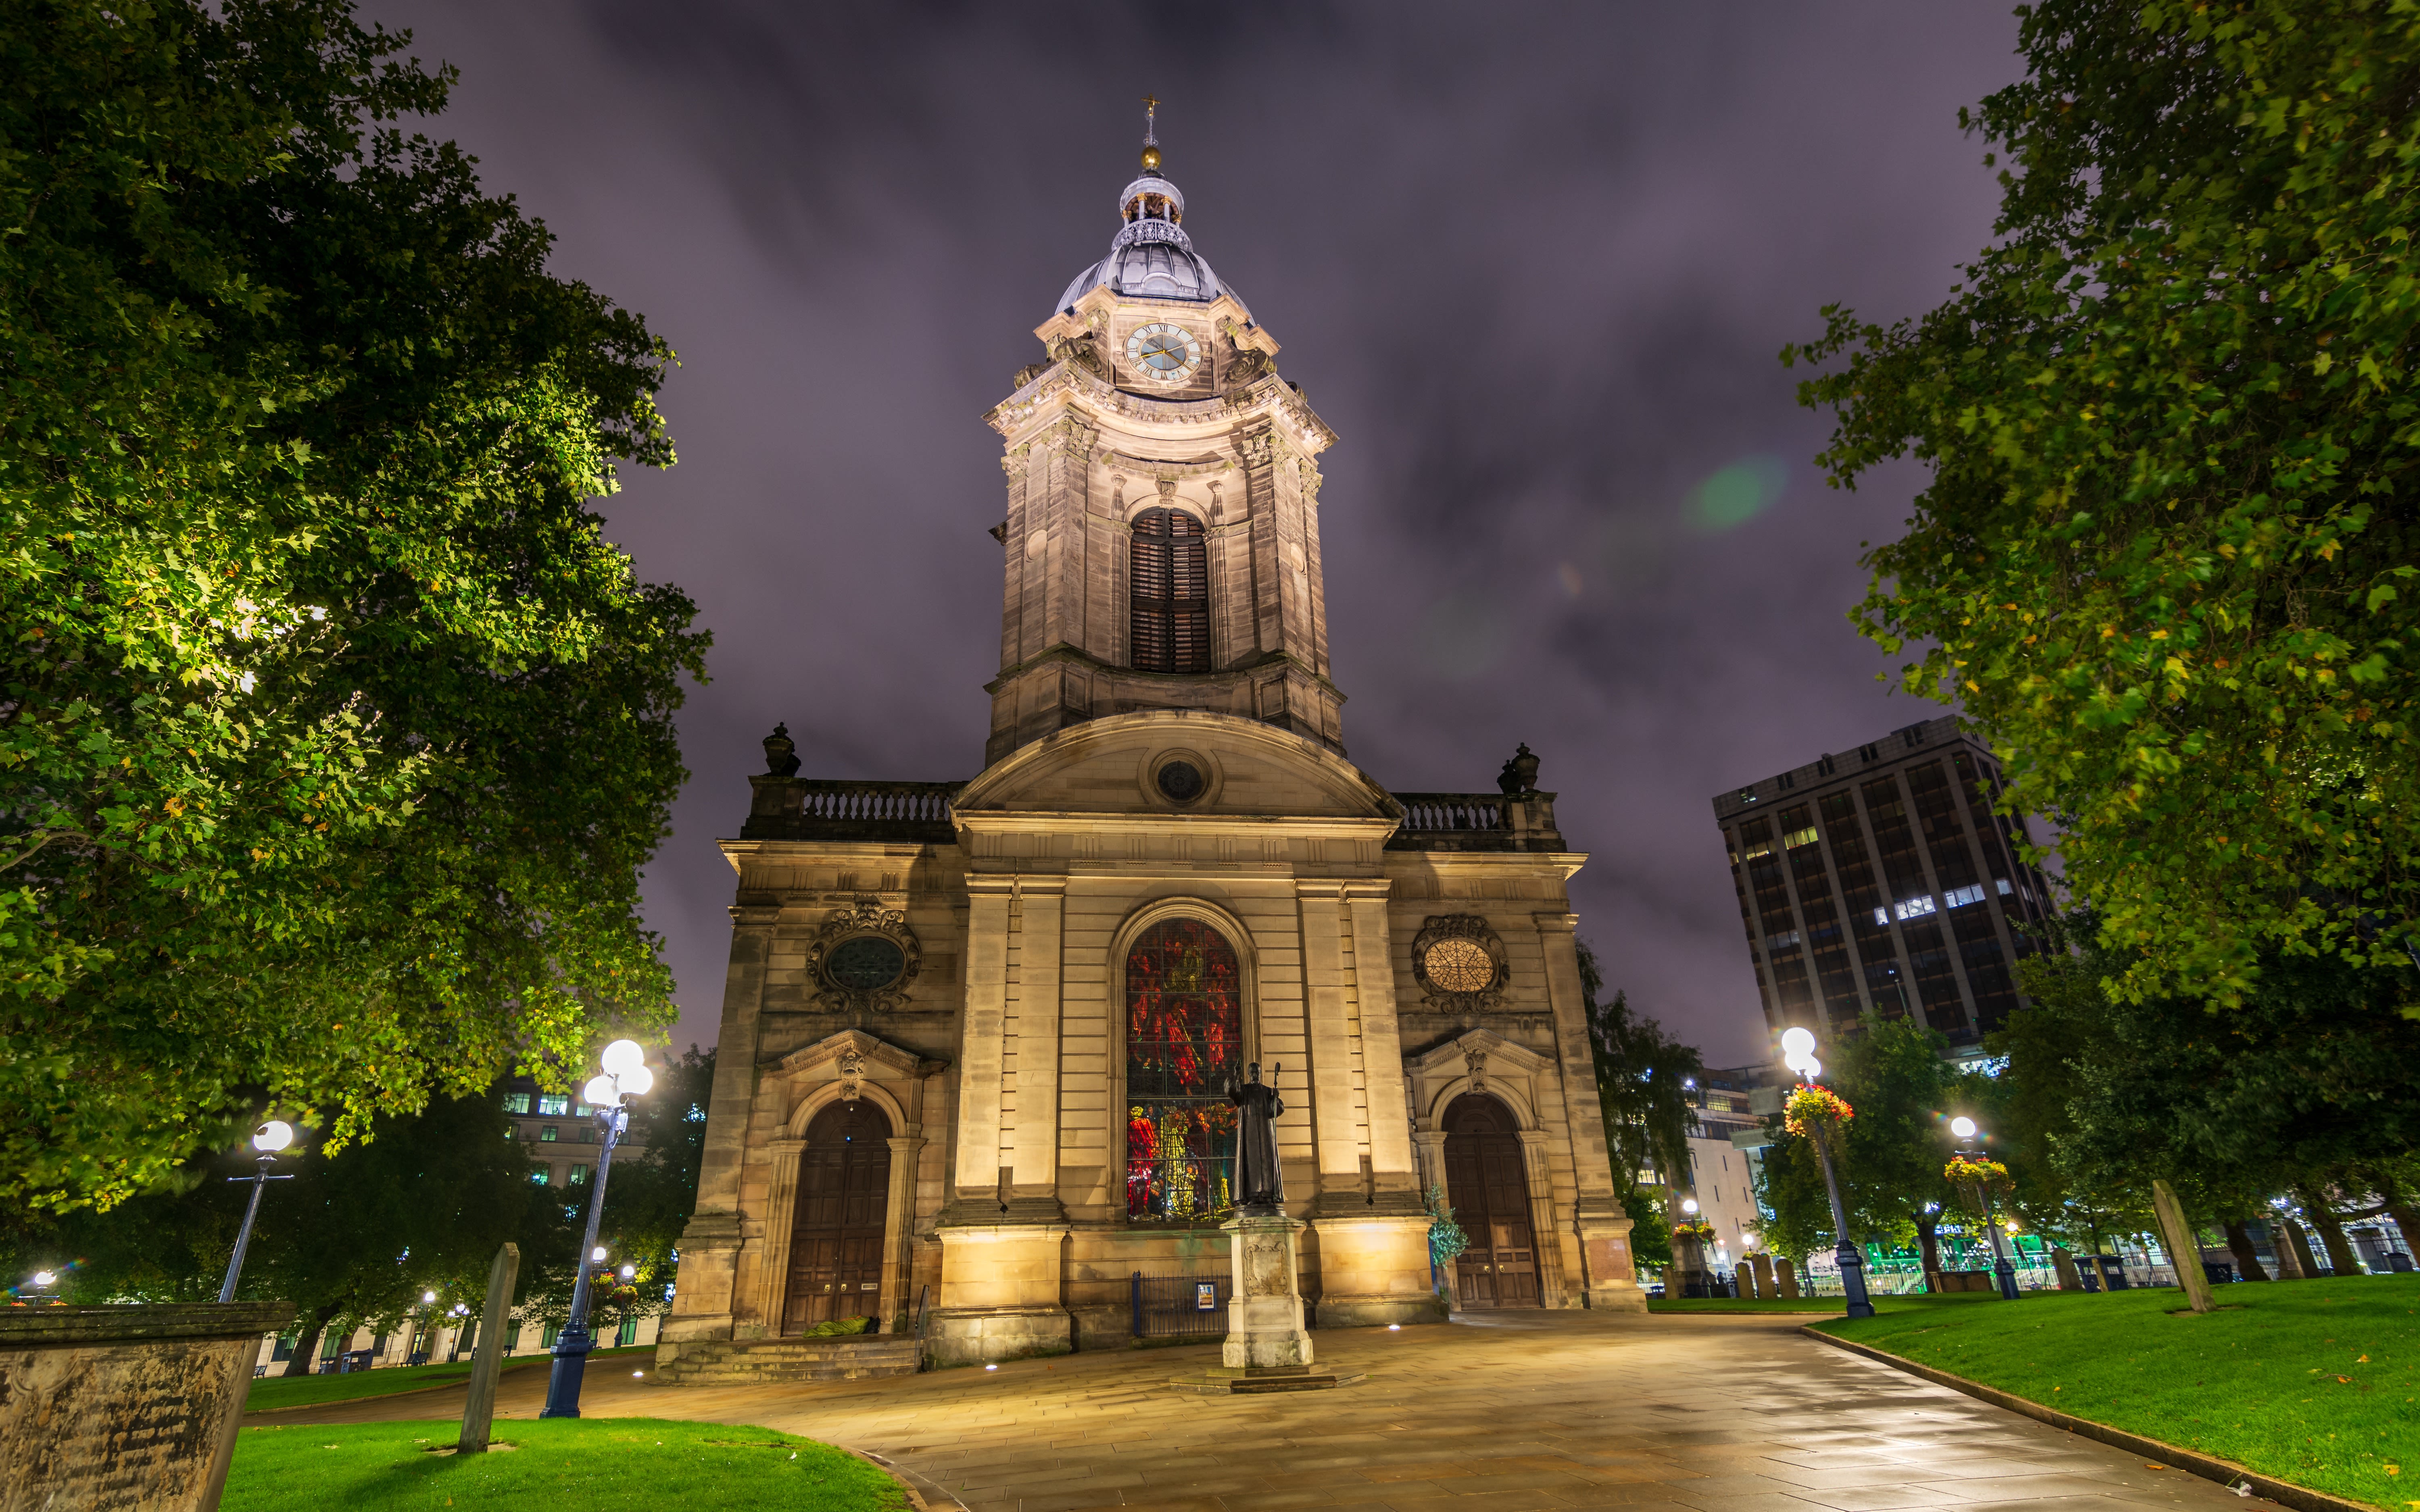 An image of St Philip’s Cathedral in Birmingham